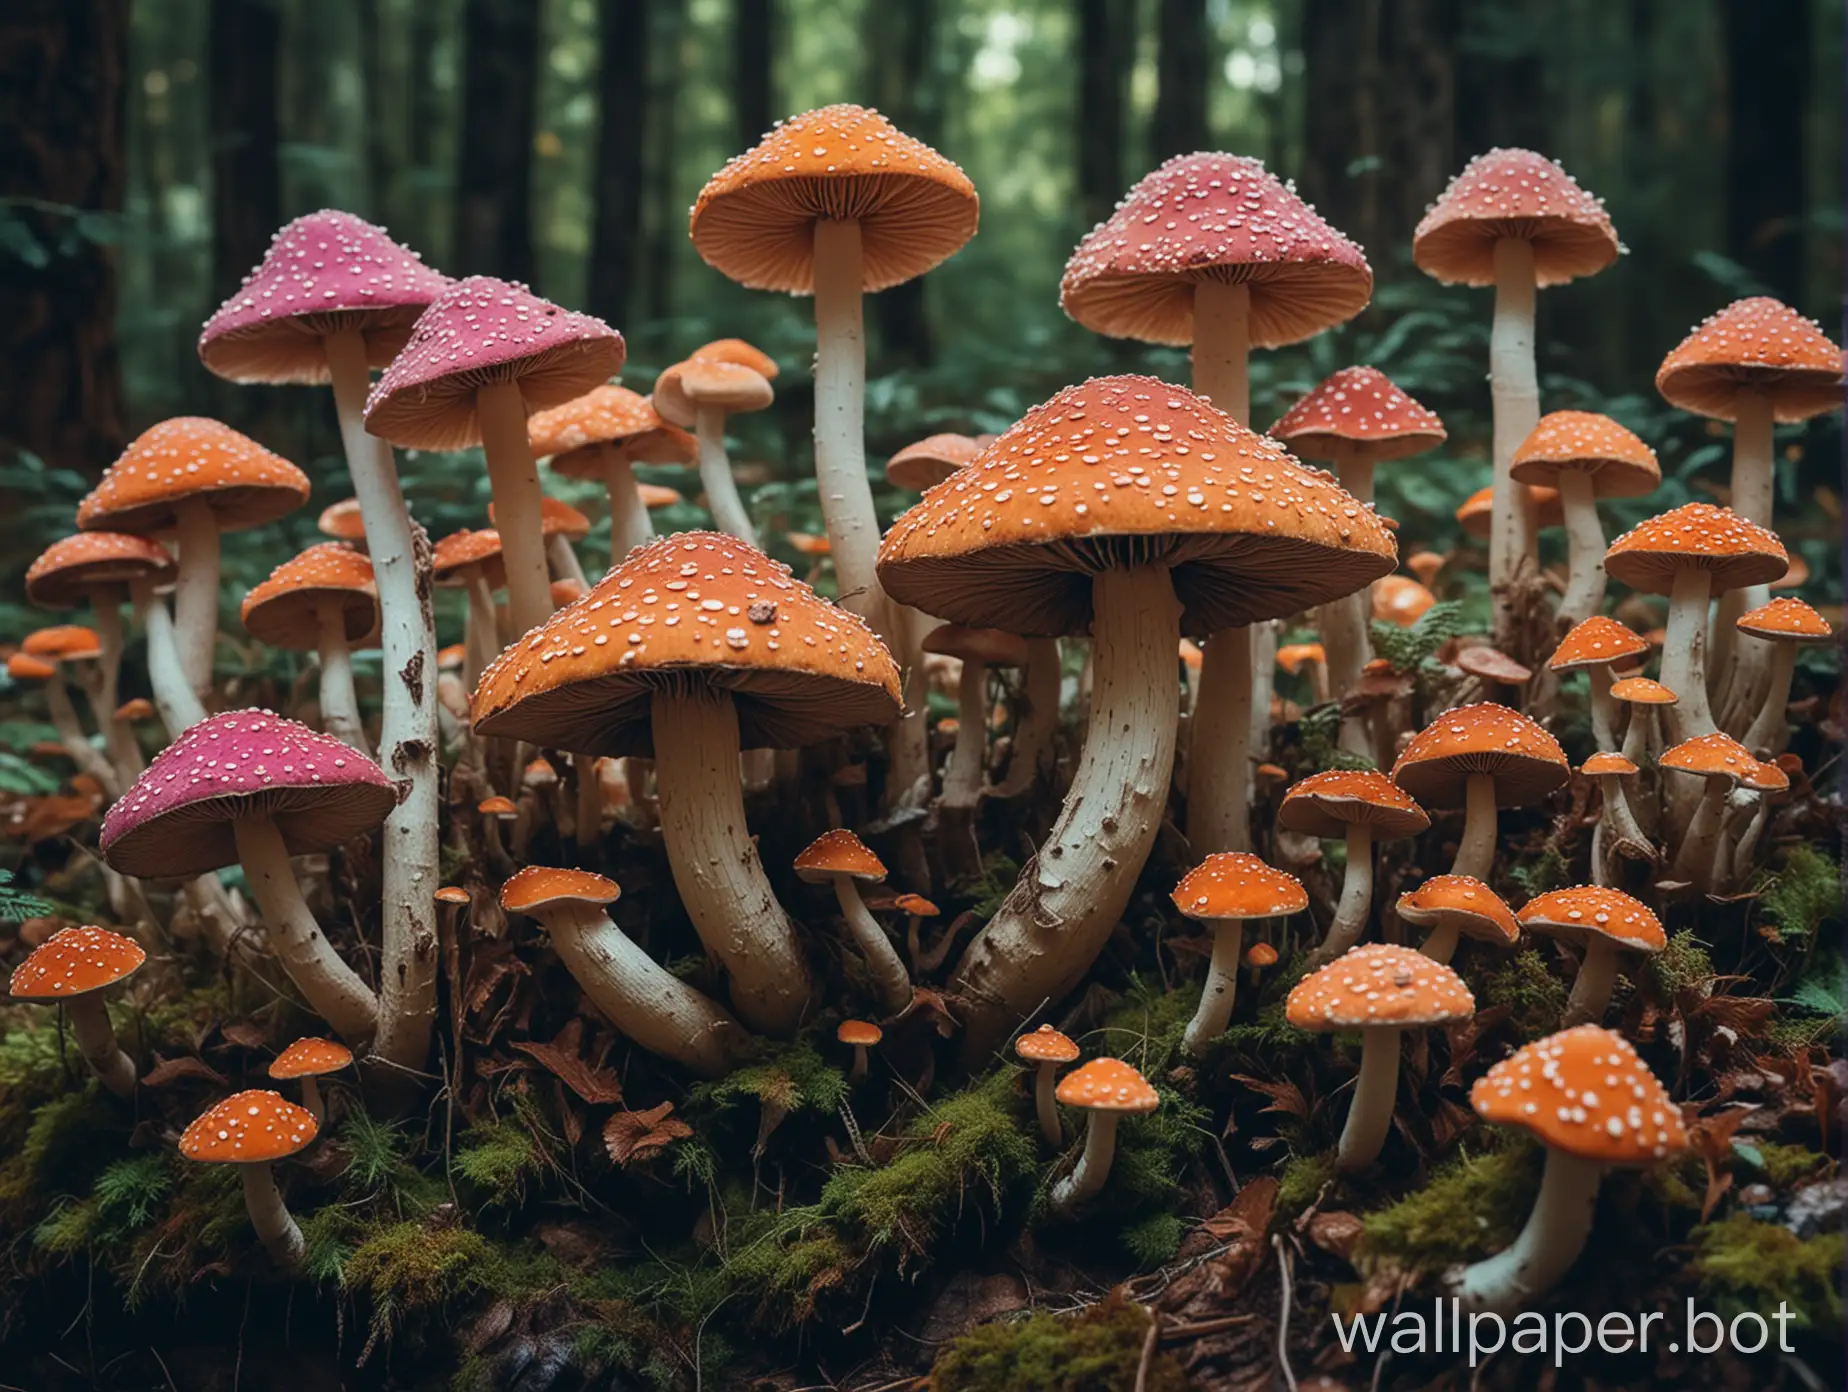 Psychedelic-Mushroom-Products-Innovative-Creations